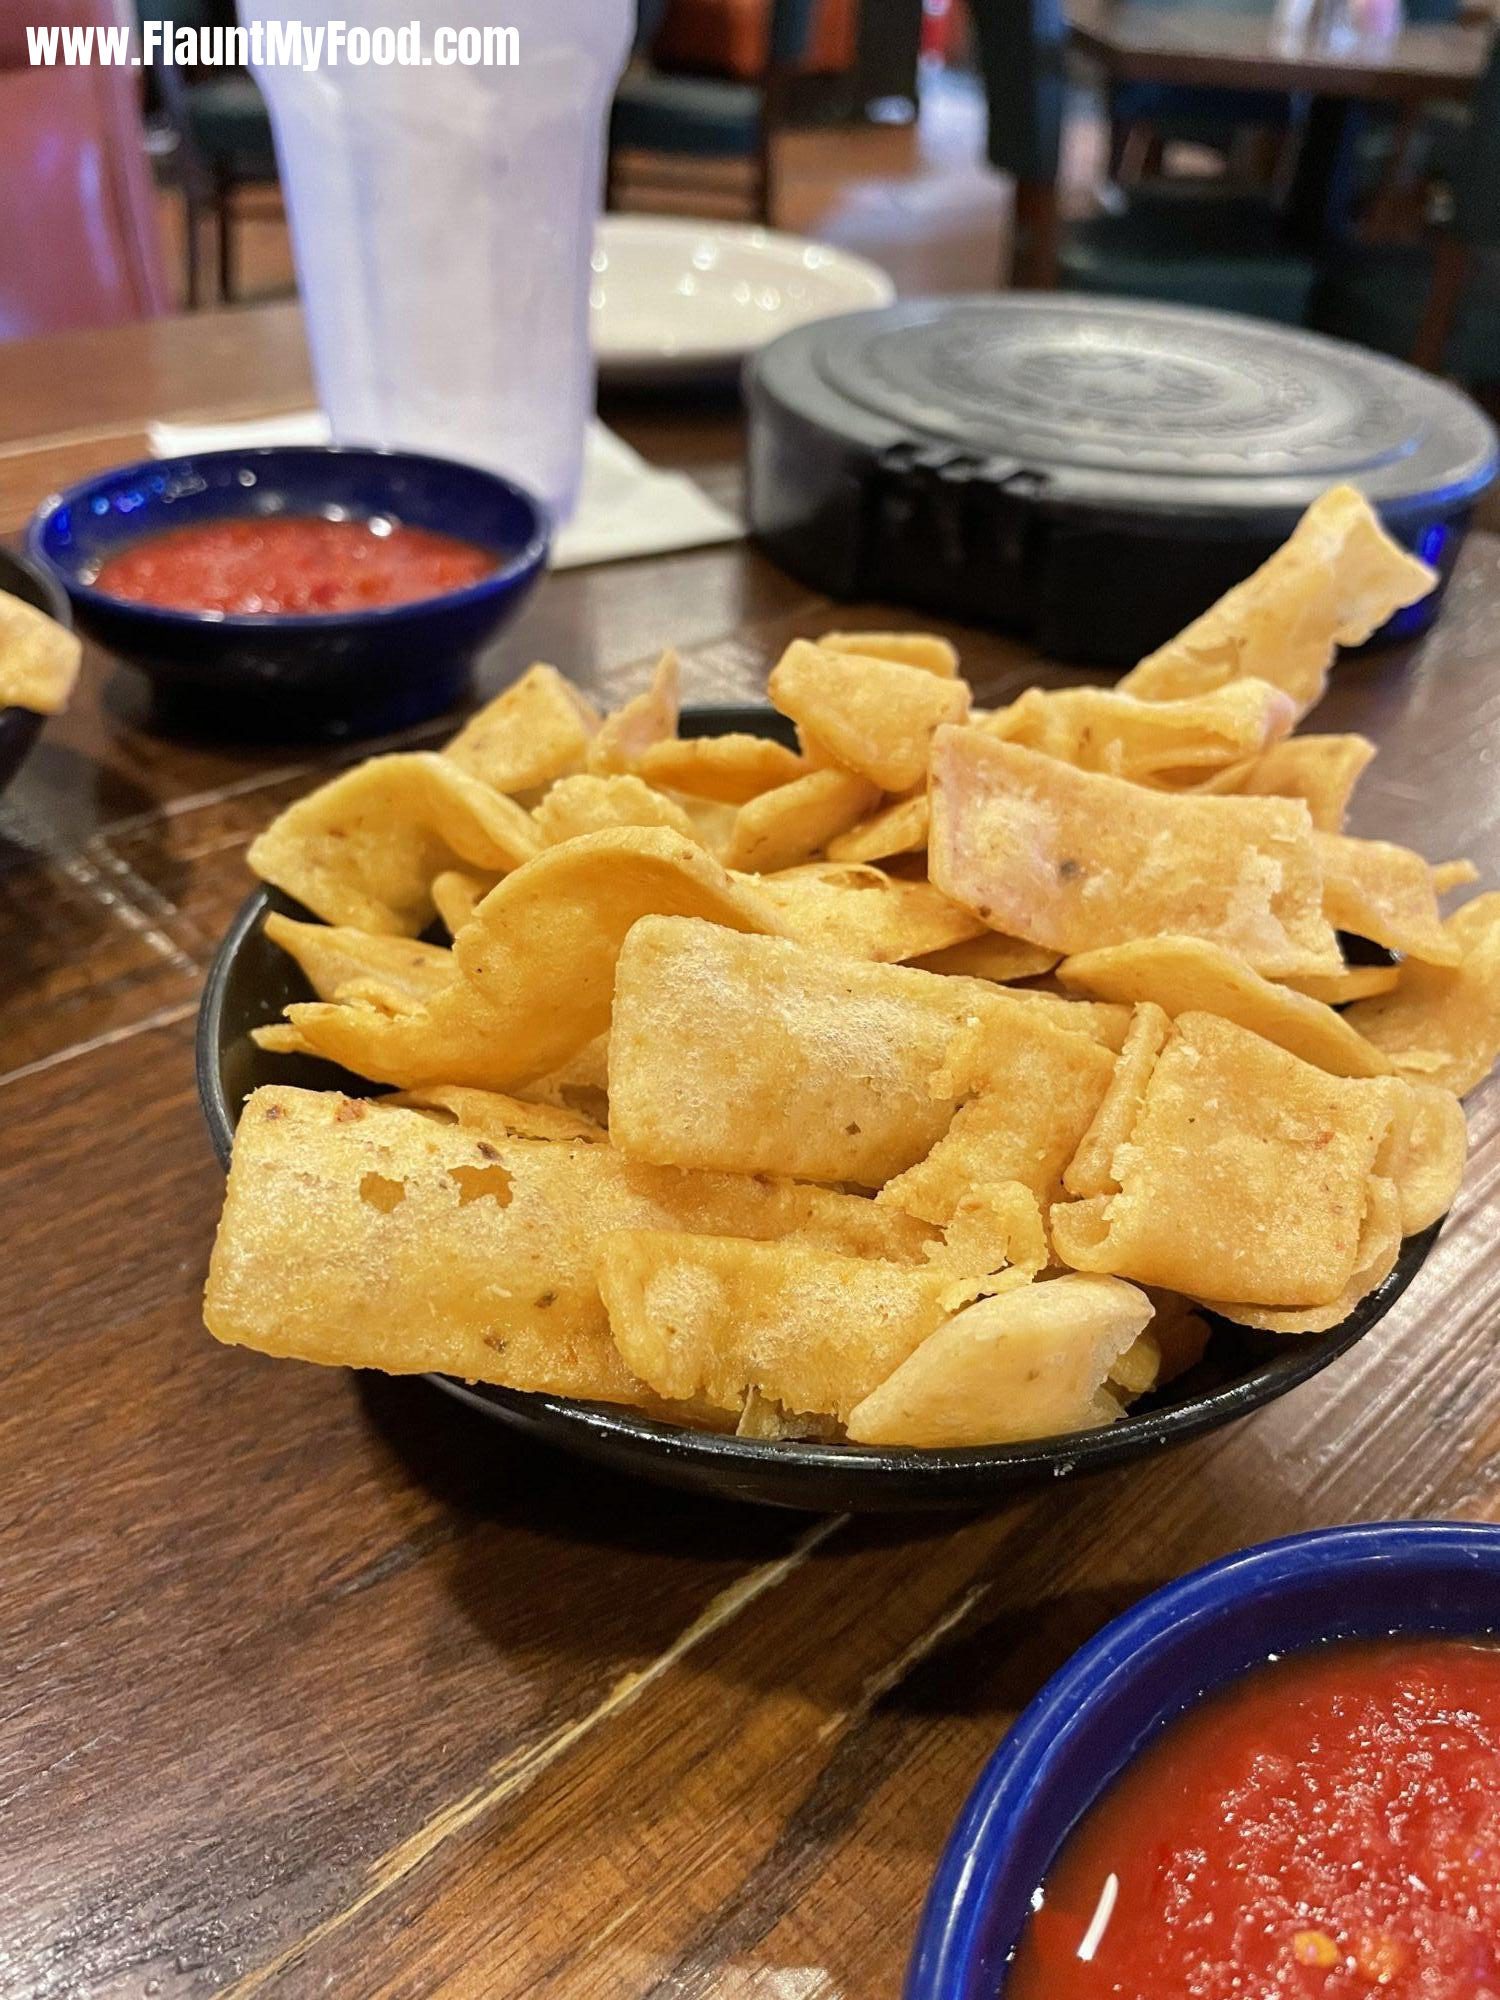 Fresh frito style chips - Mexican InnFort Worth Mexican Inn on Hulen has delicious chips served with every meal!